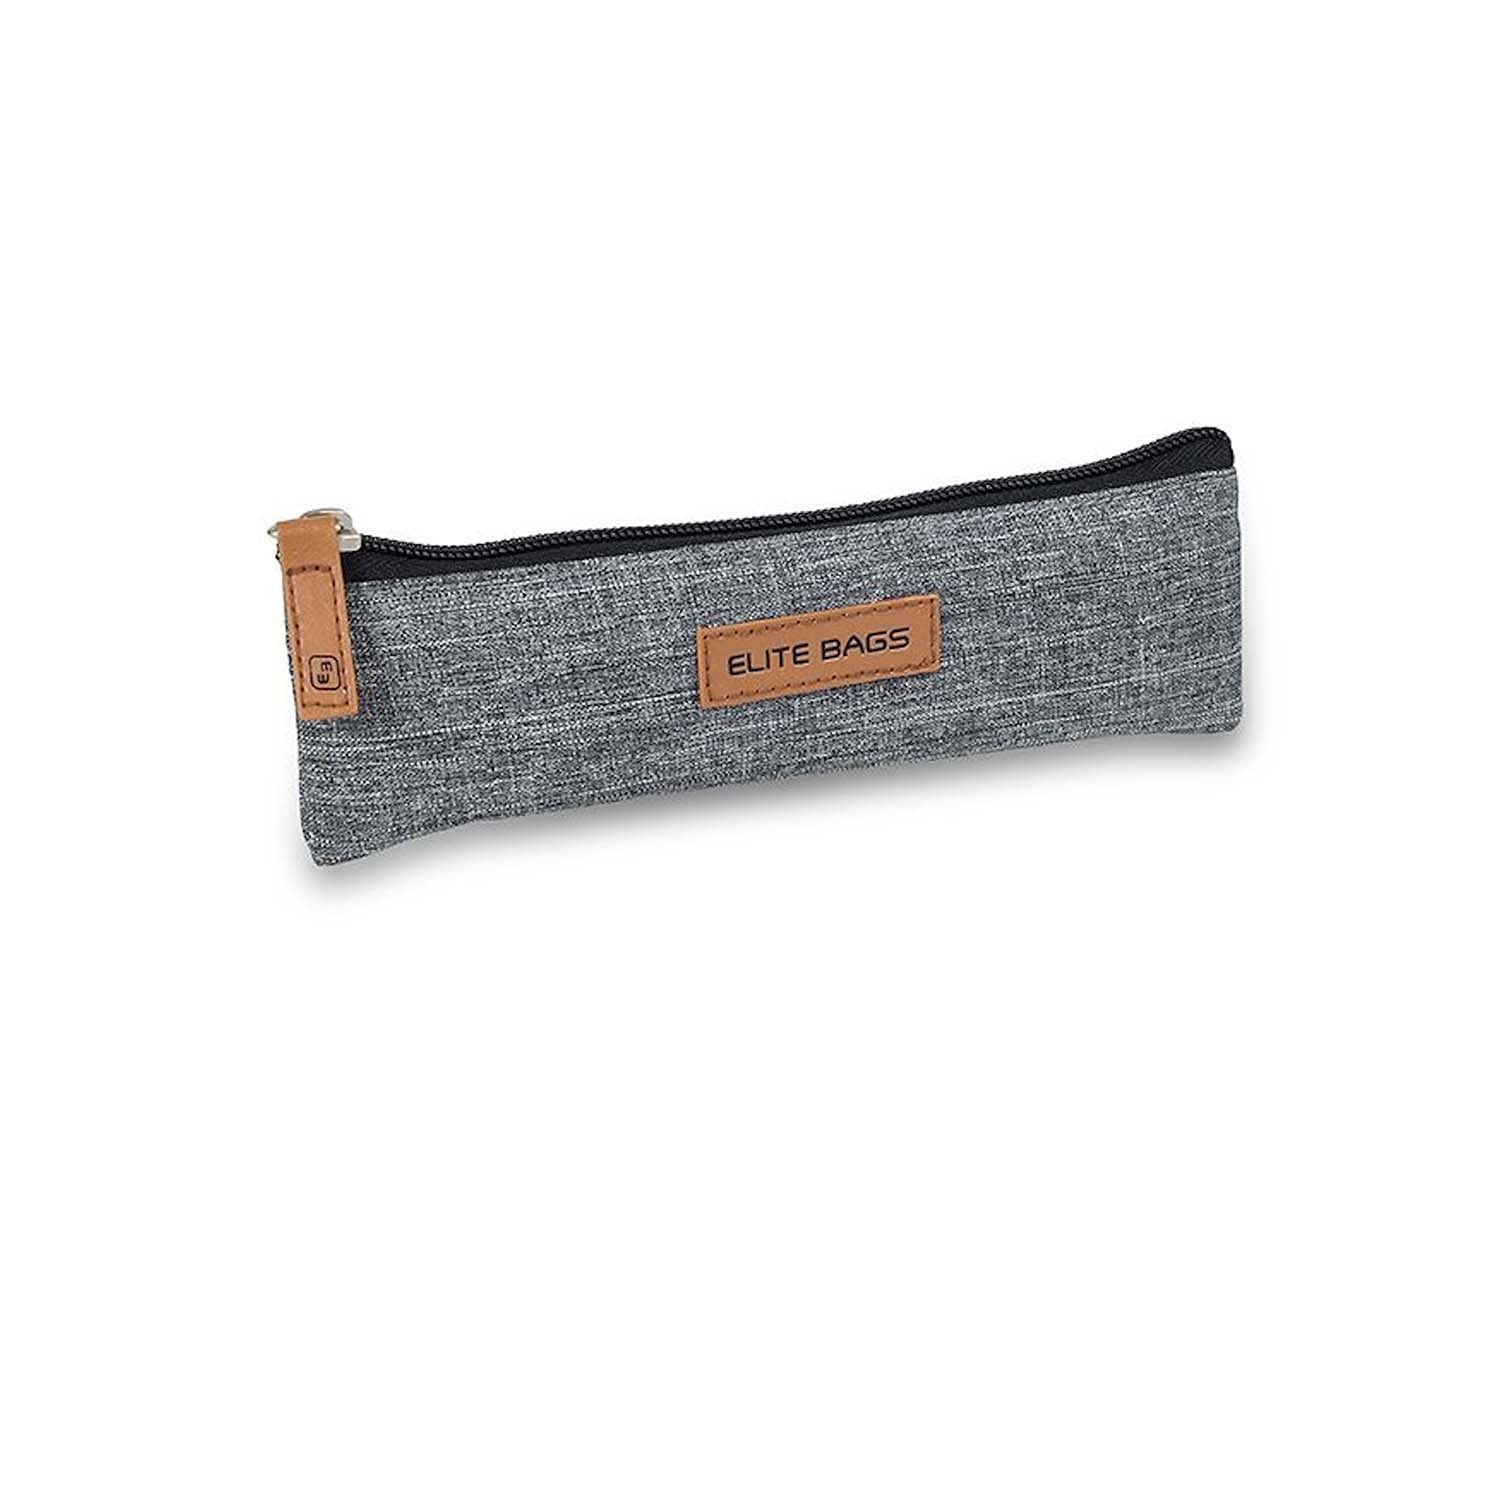 Insulin's Isothermal Insulin Carrying Case